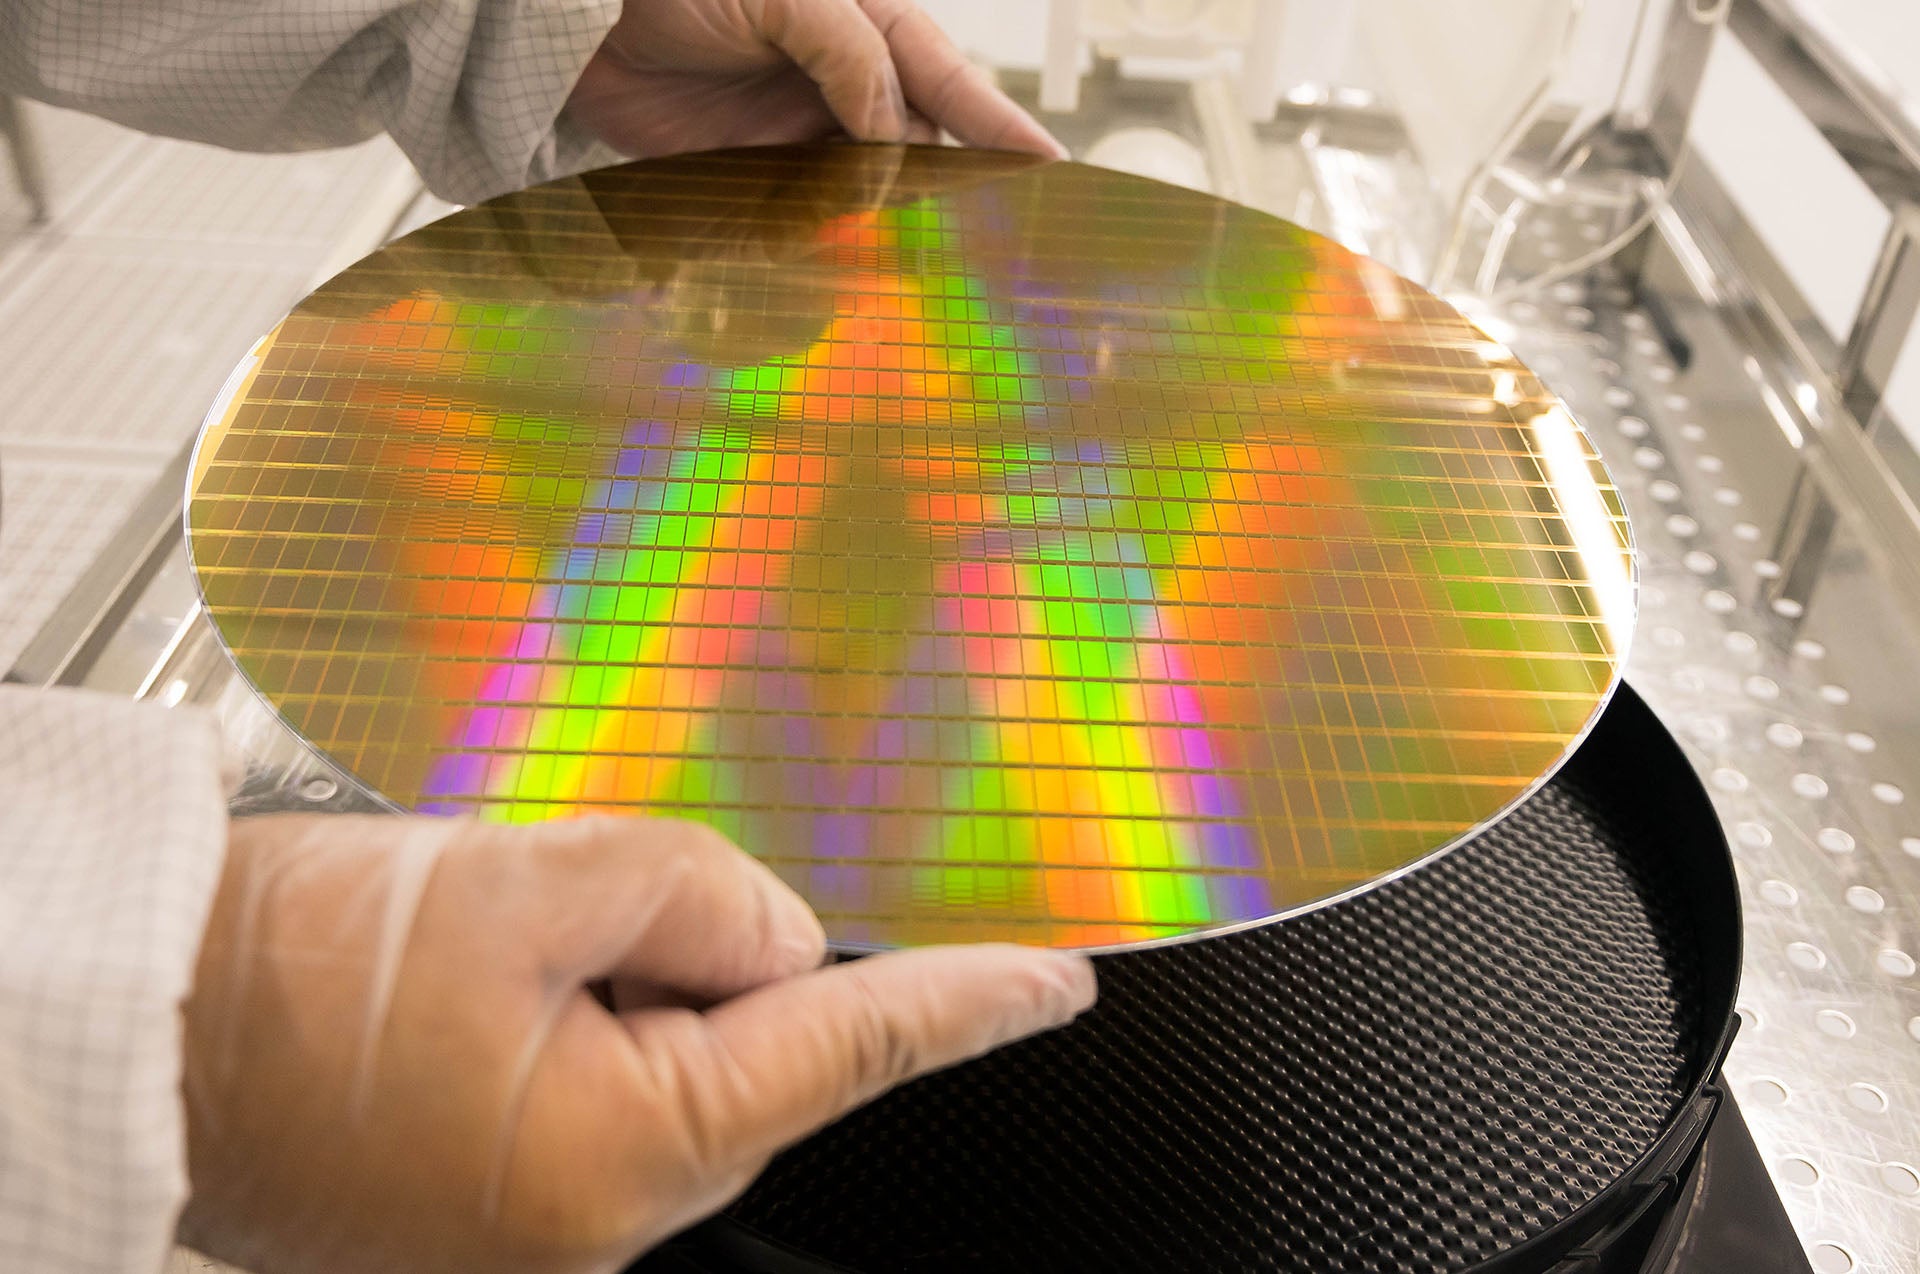 AMD’s CEO: Wafer Supply is Tight Going into 2020